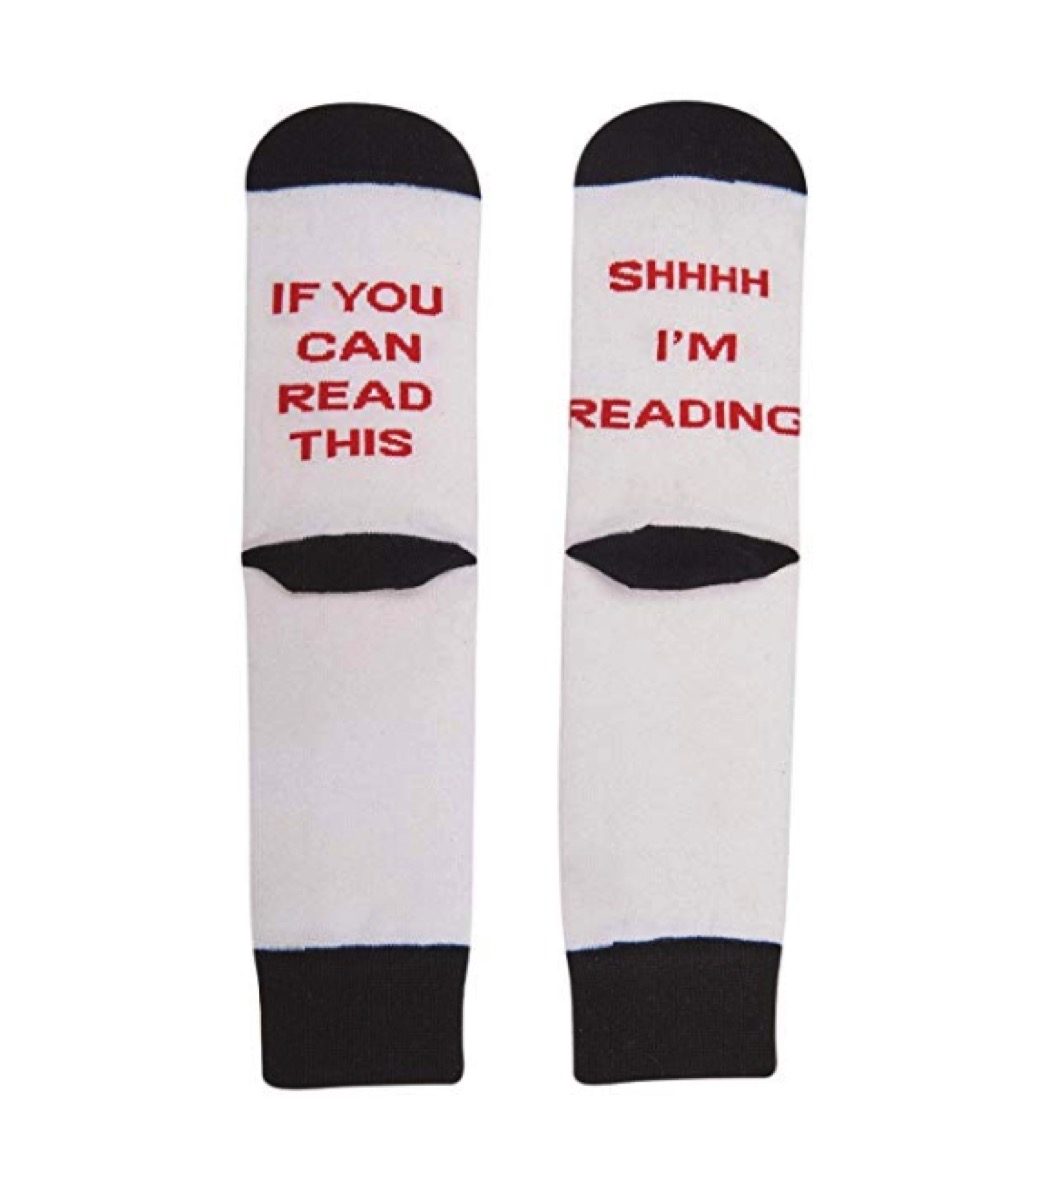 shh I'm reading socks from amazon, gifts for book lovers